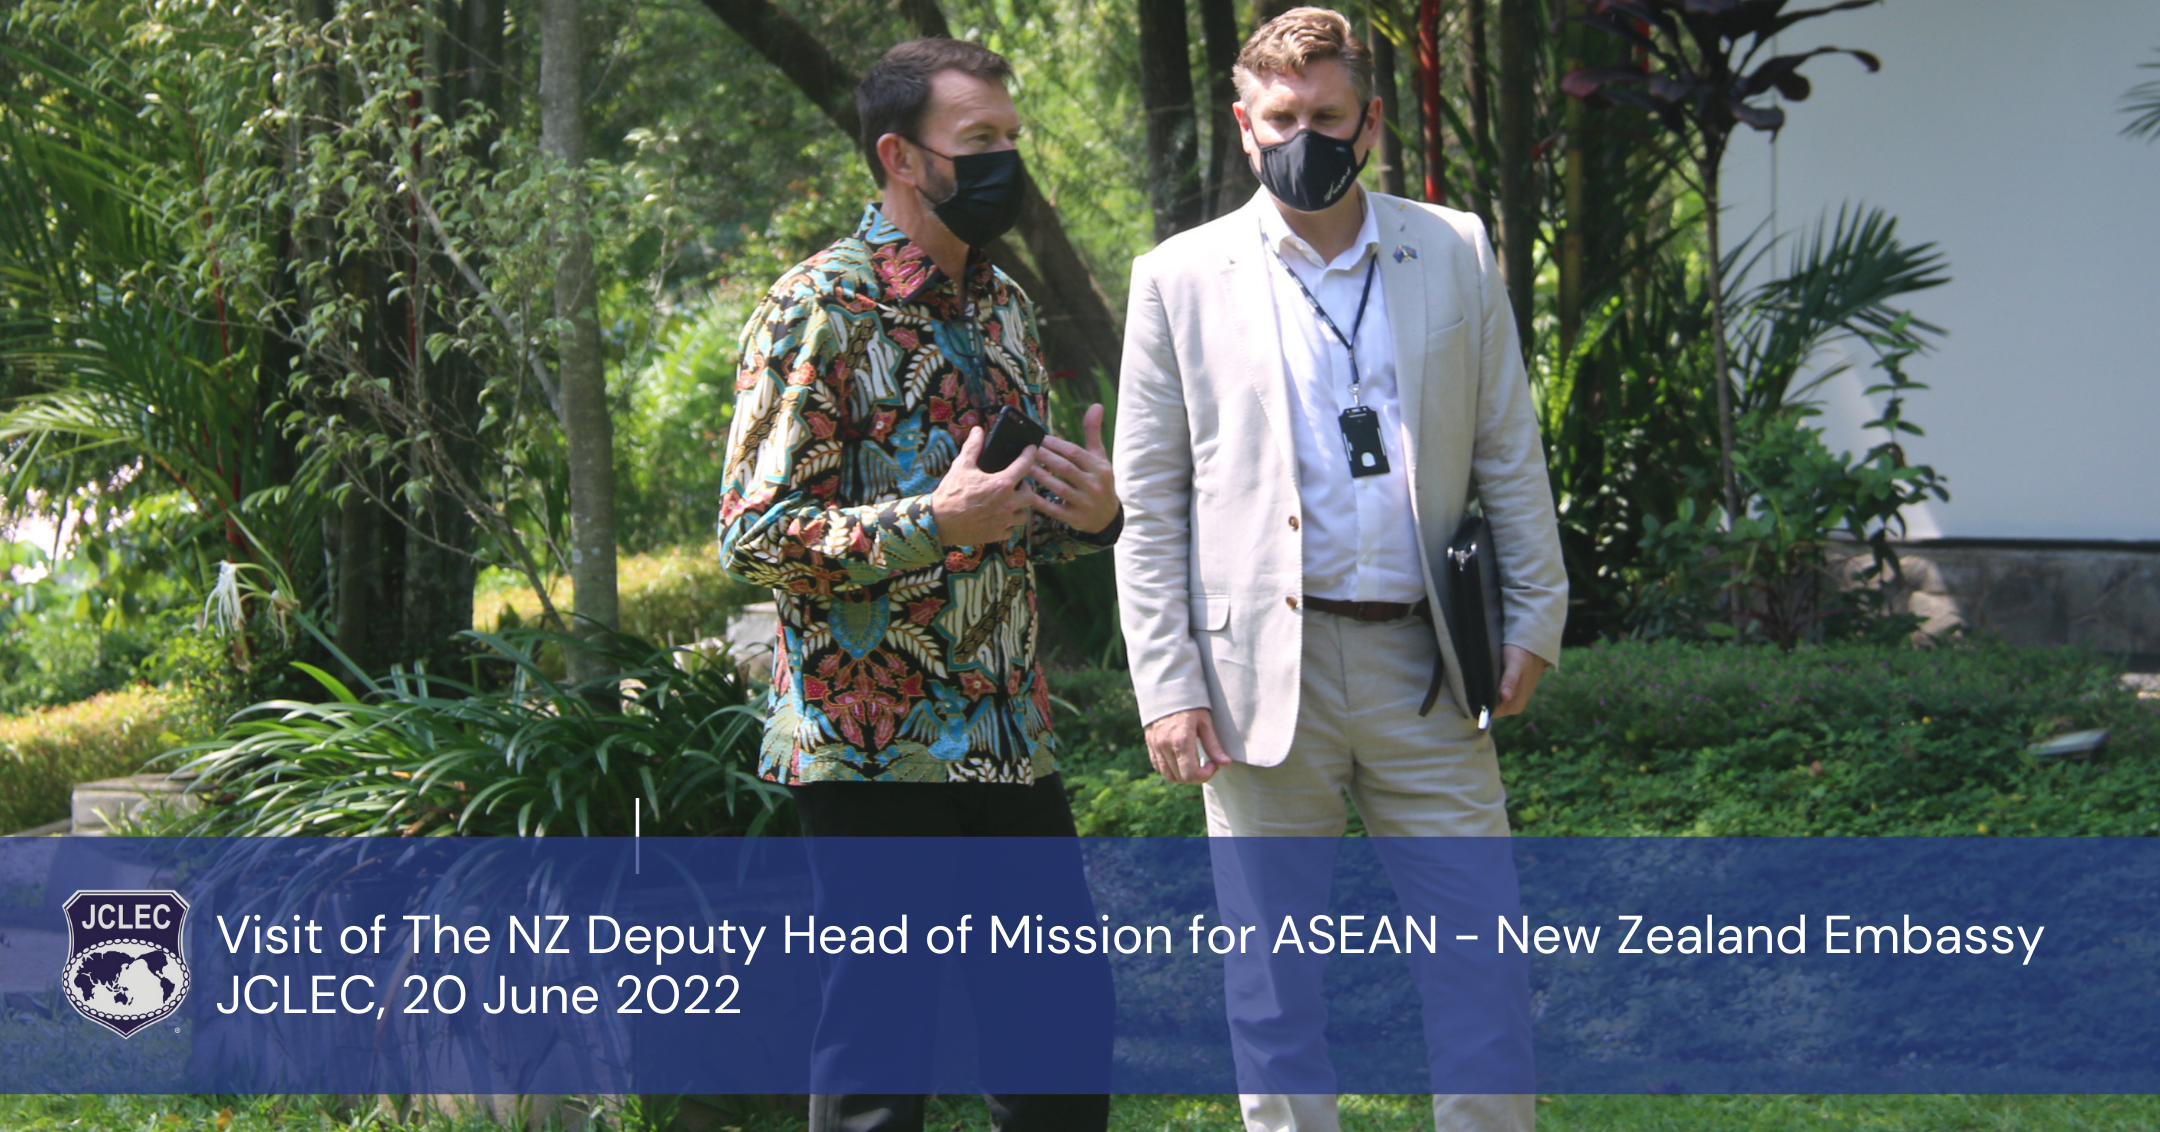 JCLEC’s Executive Director Programs with the New Zealand Deputy Head of Mission for ASEAN